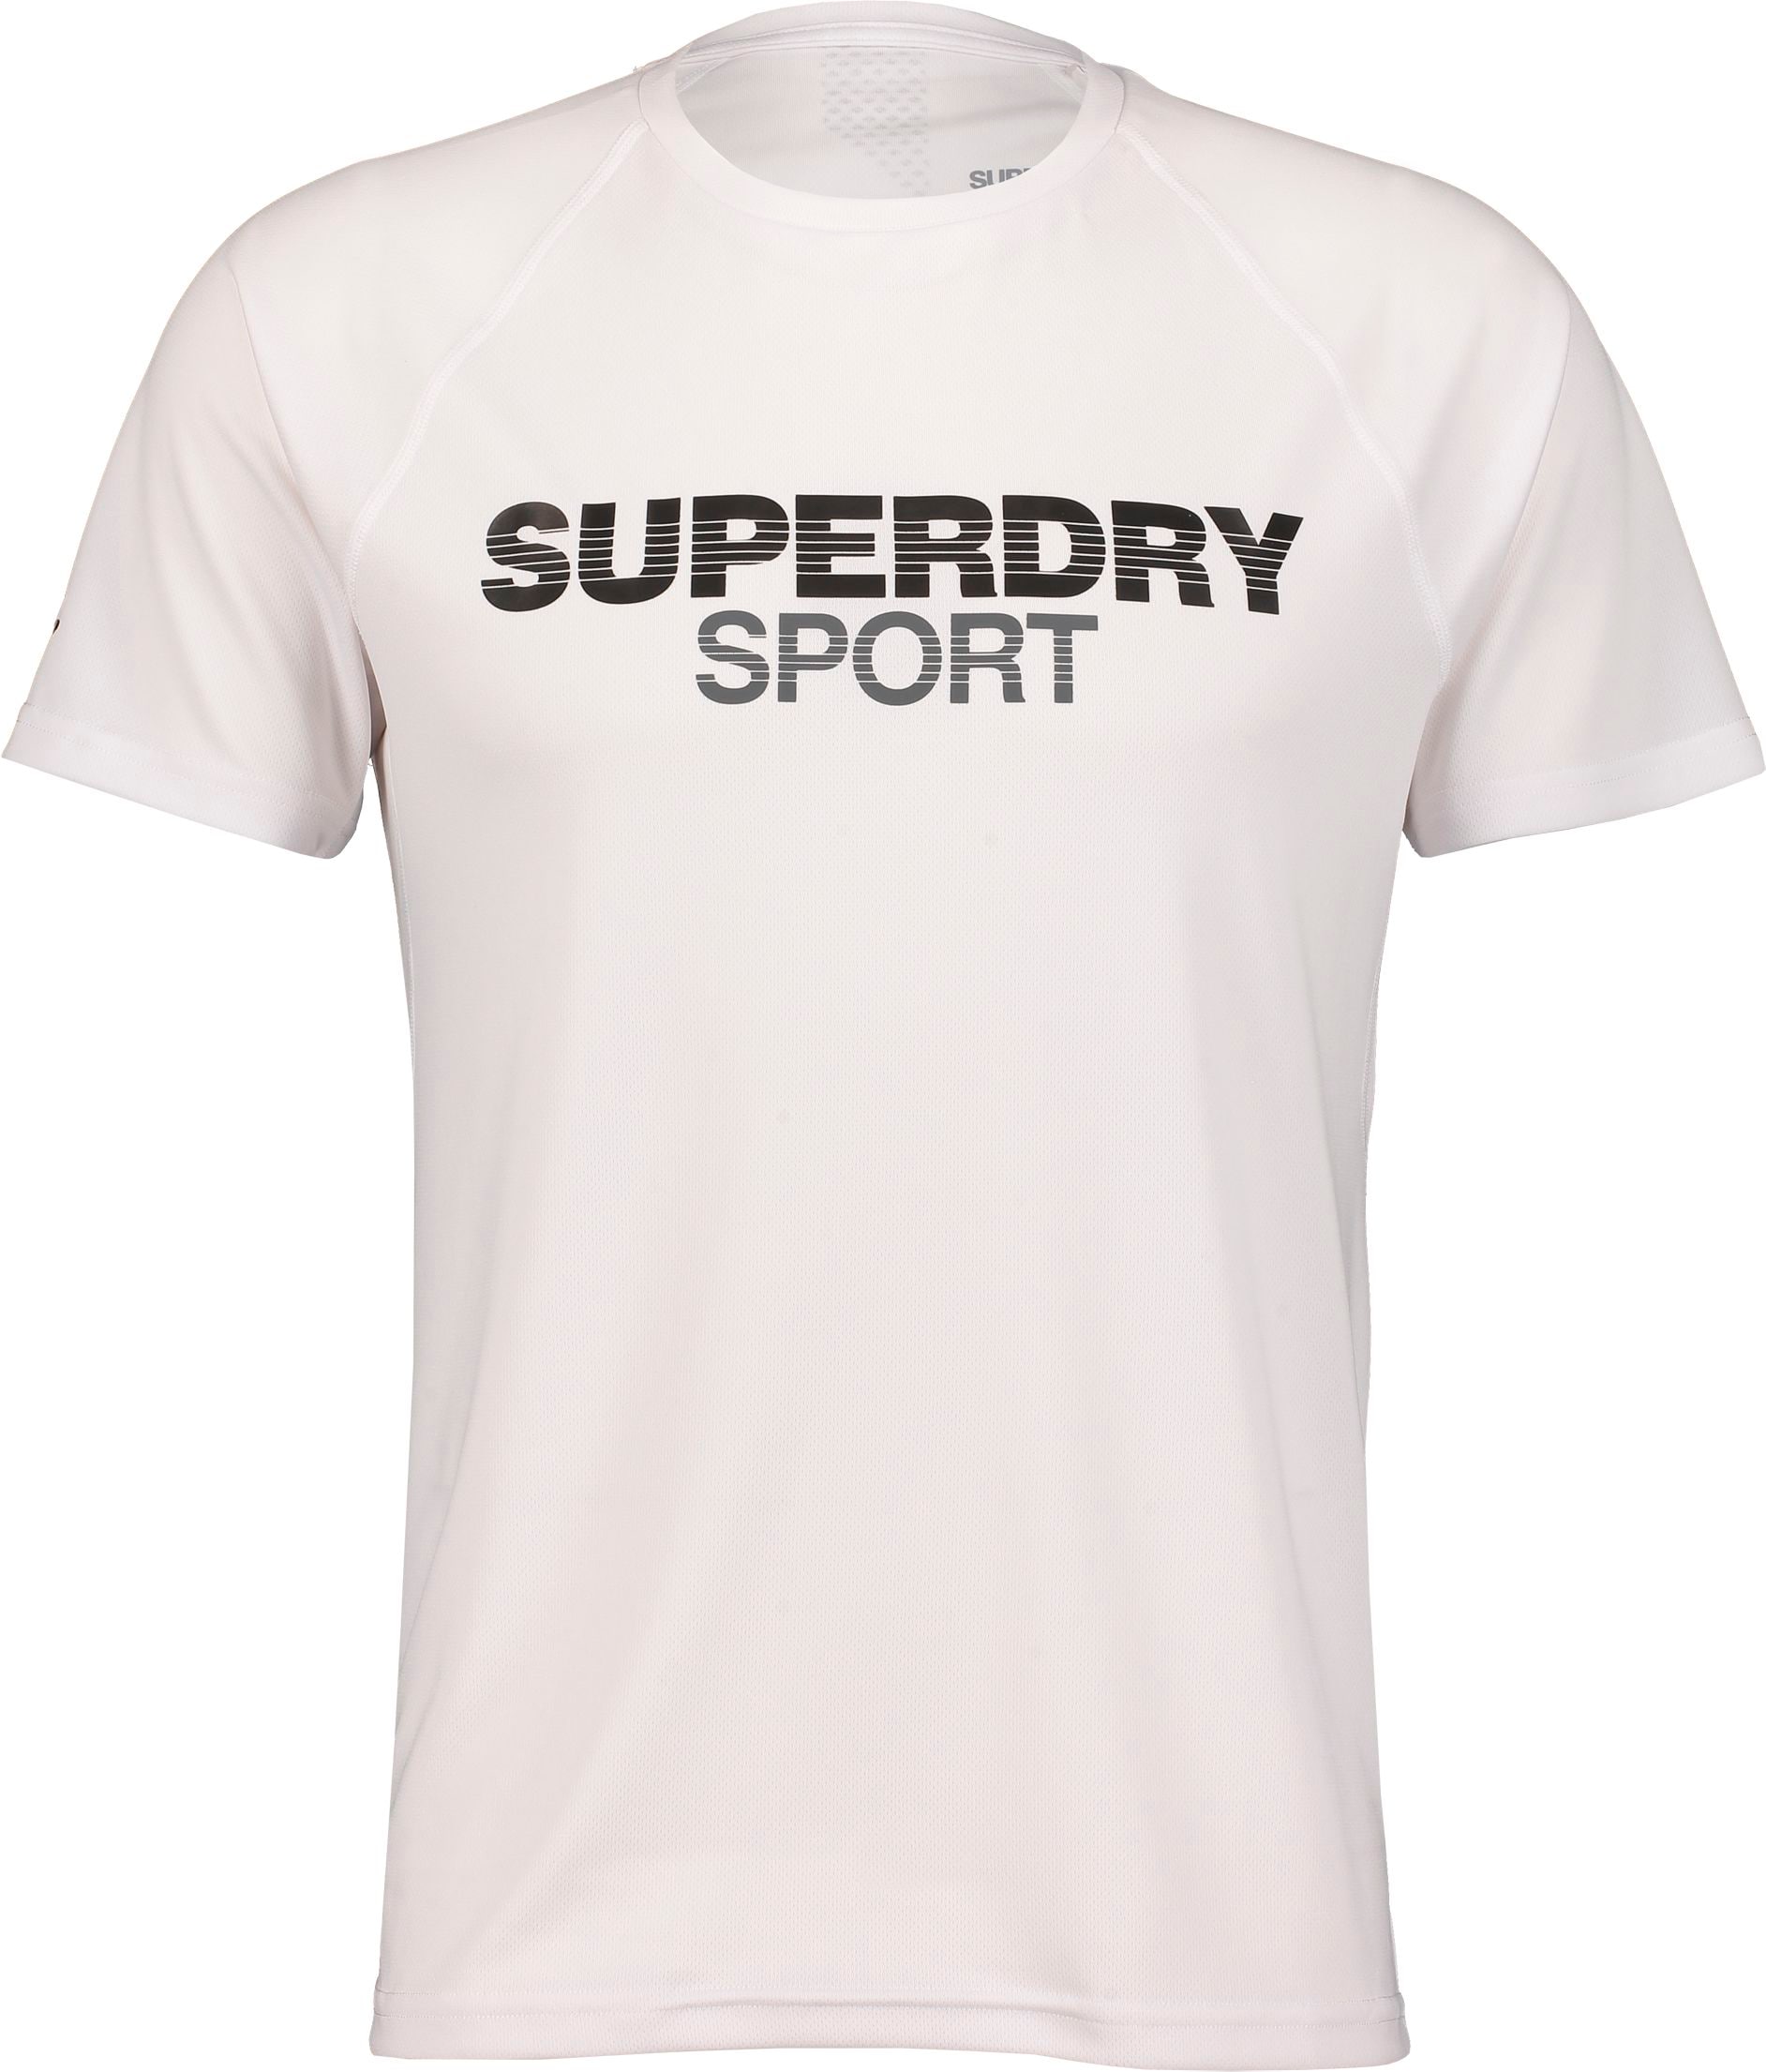 SUPERDRY, M TRAIN ACTIVE LOGO SS TEE